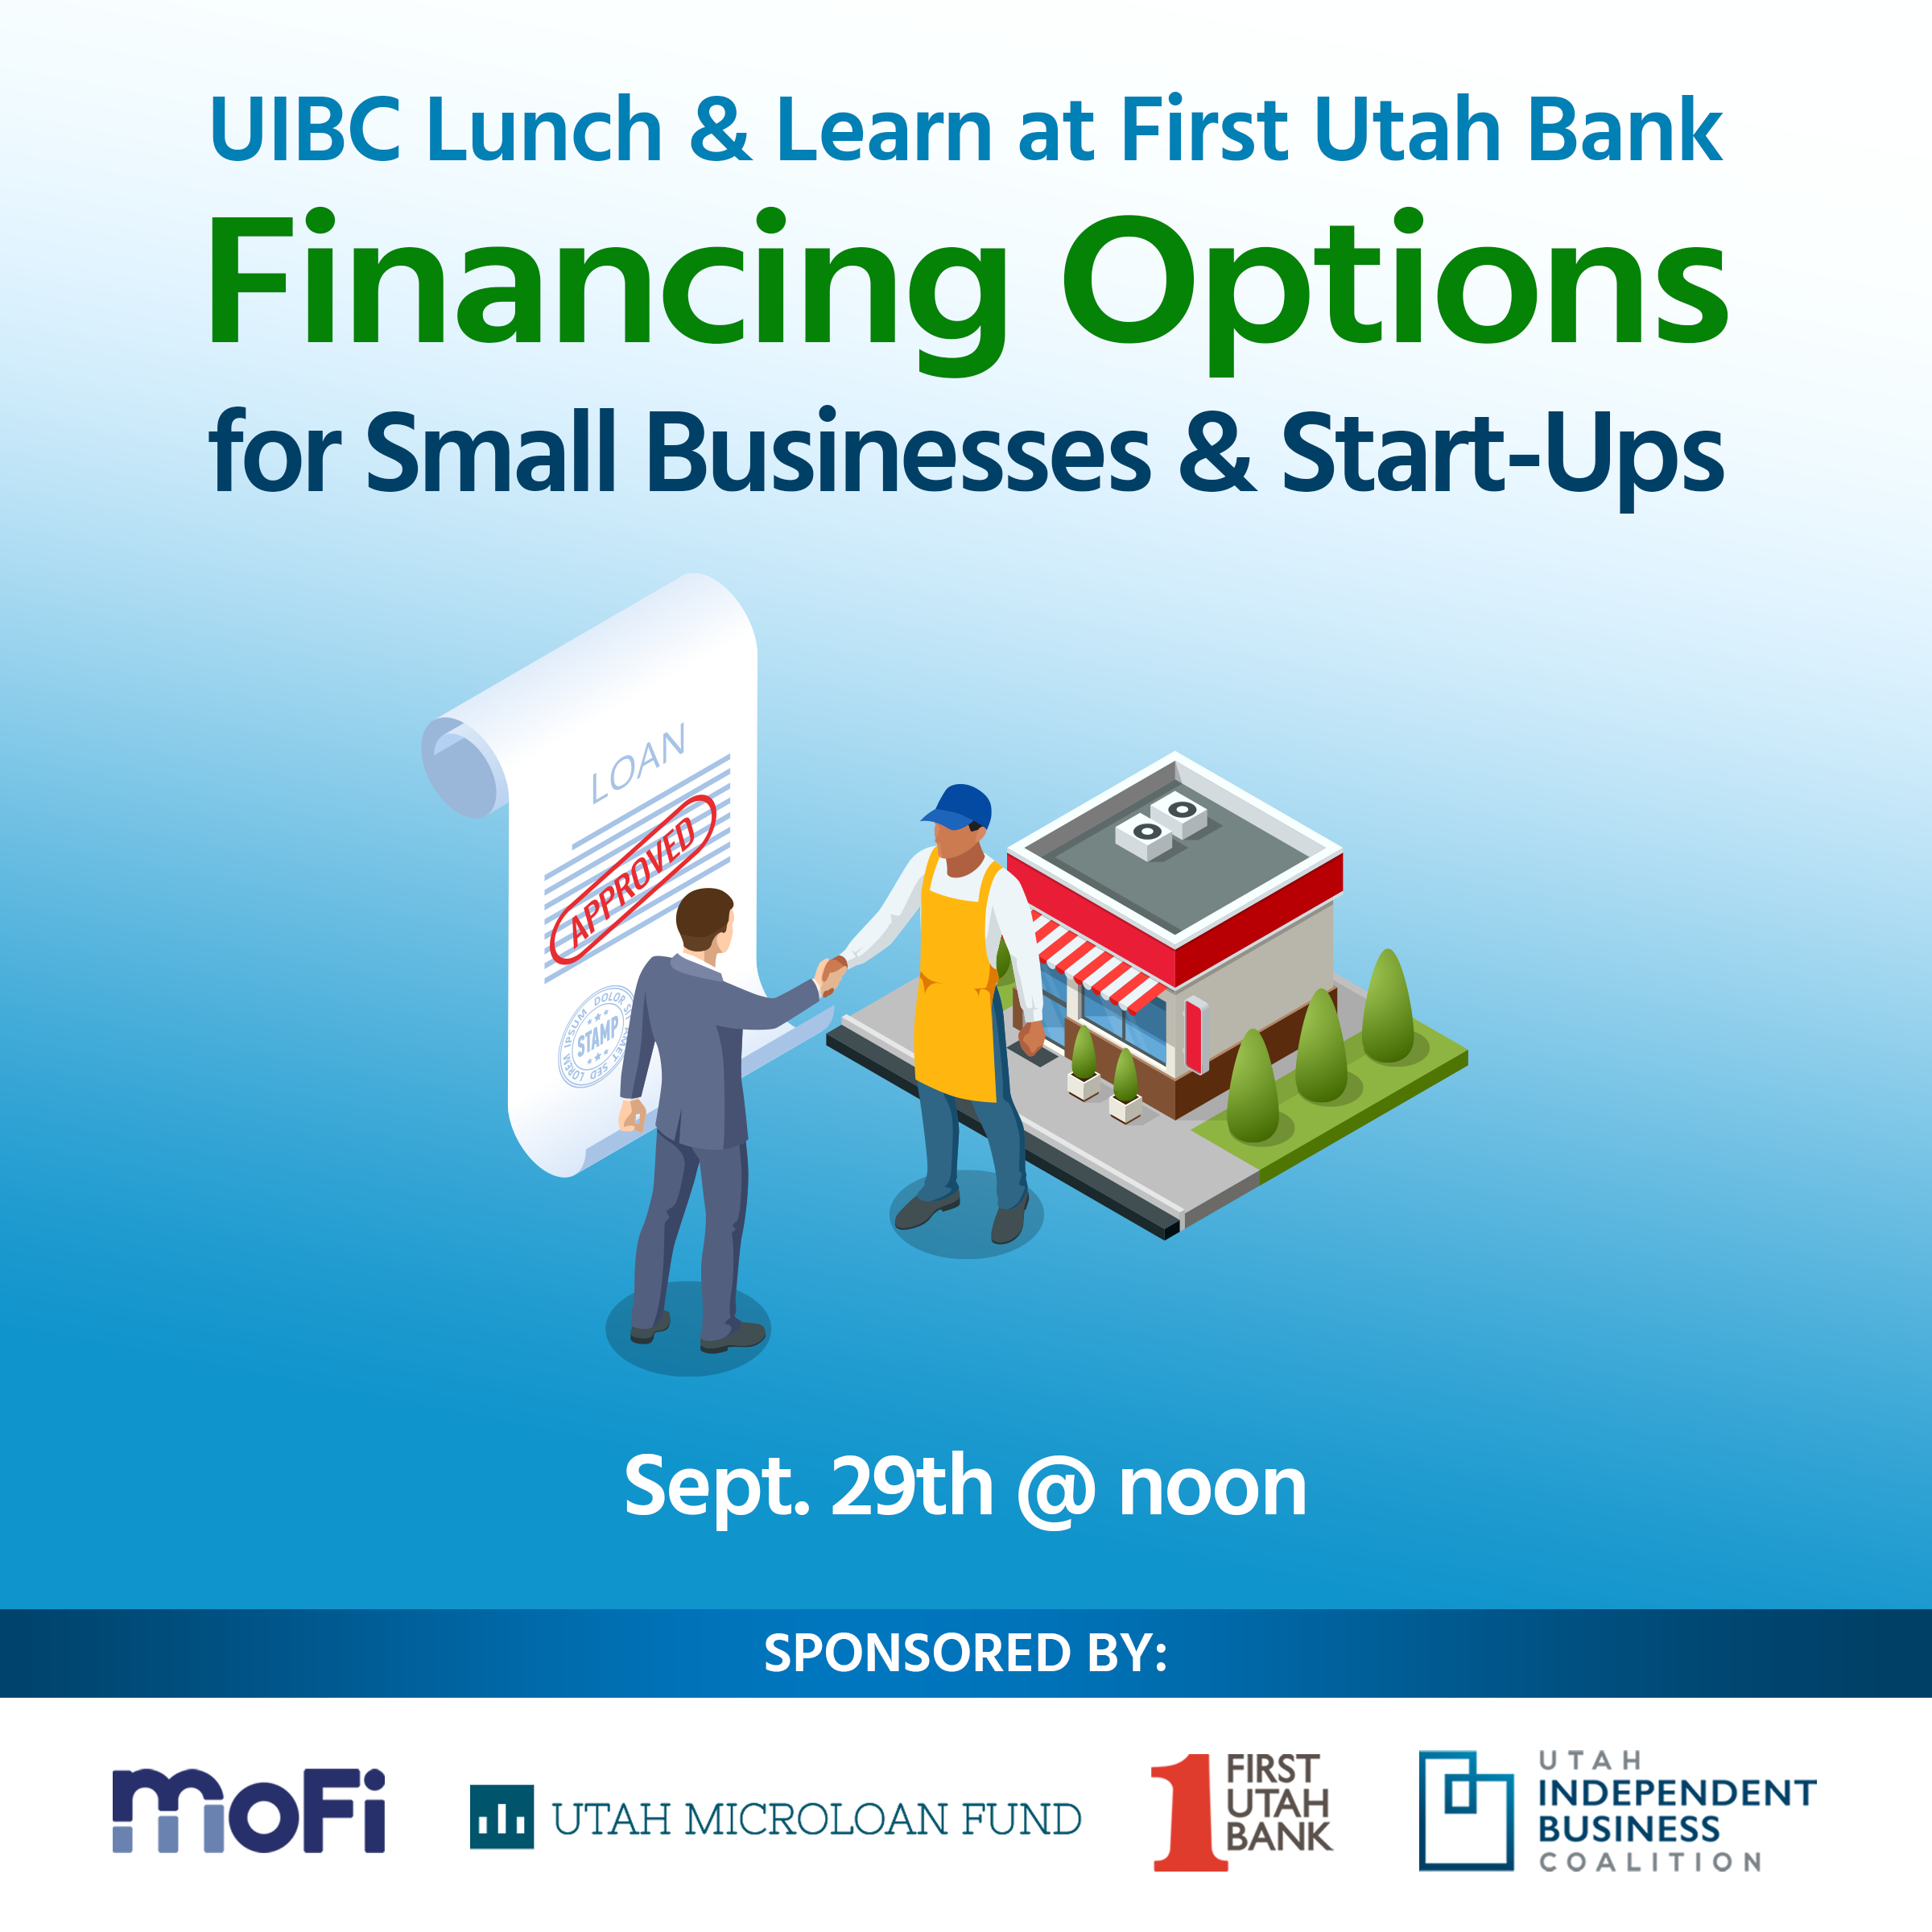 Financing Options for Small Businesses and Start-Ups